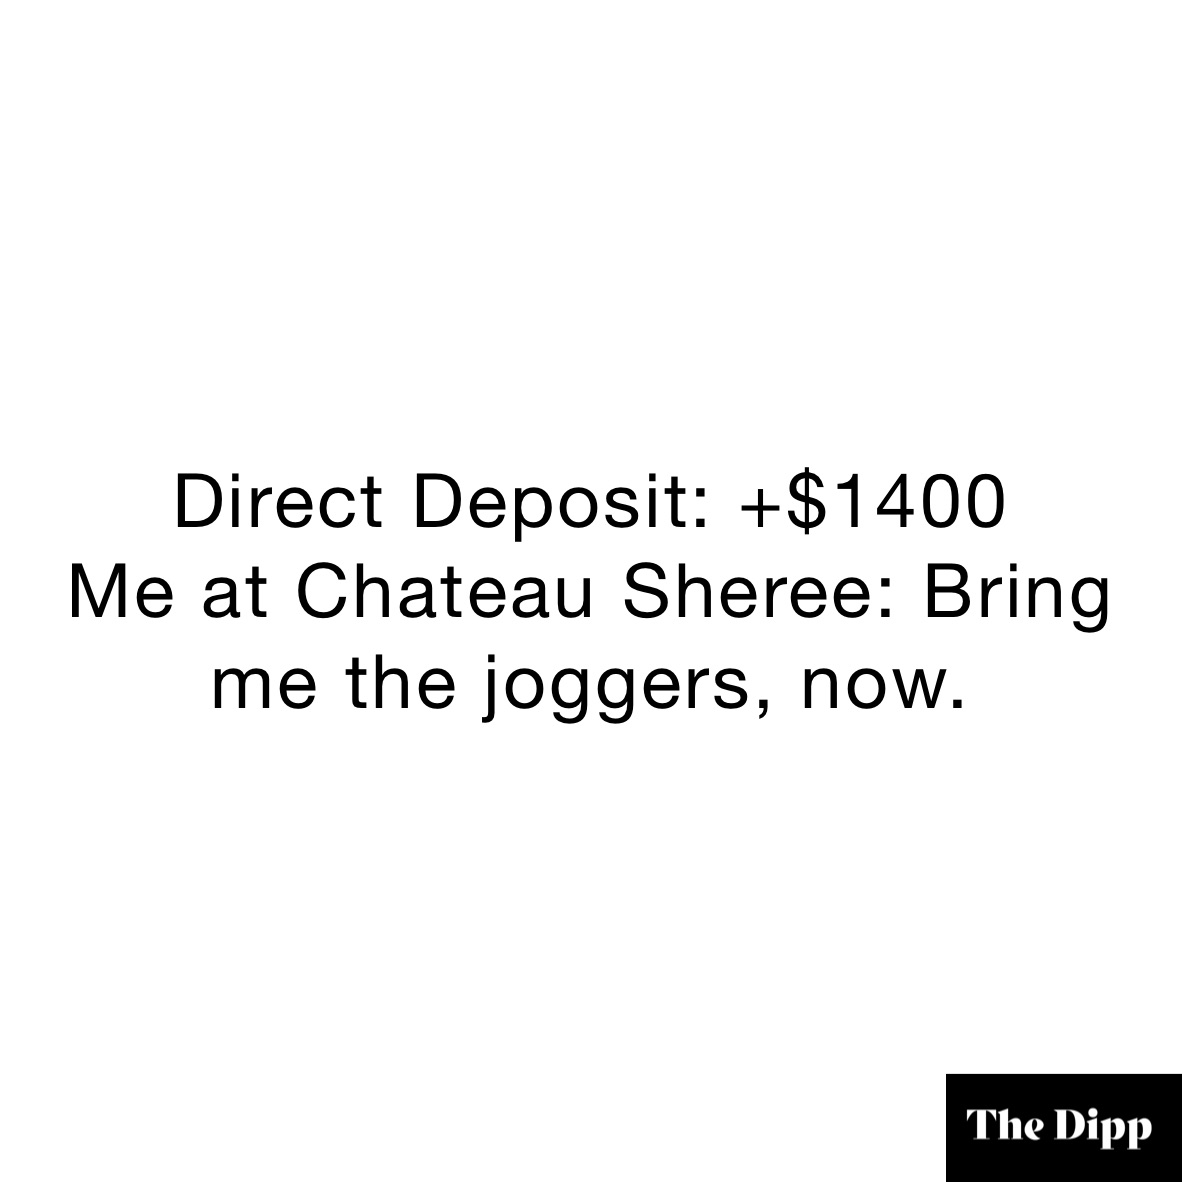 Direct Deposit: +$1400
Me at Chateau Sheree: Bring me the joggers, now.